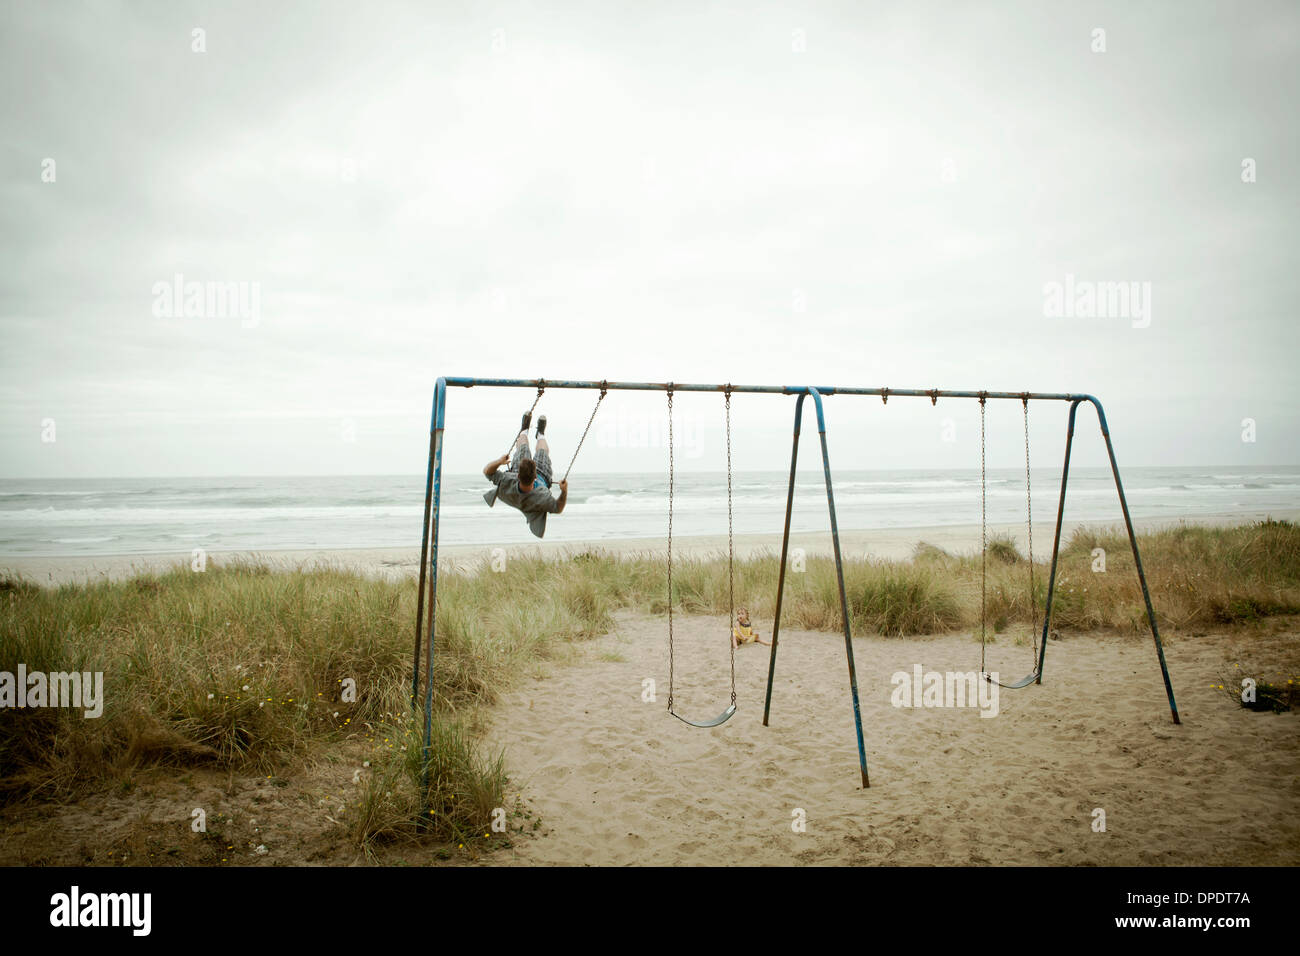 Female toddler watching father on beach swing Stock Photo